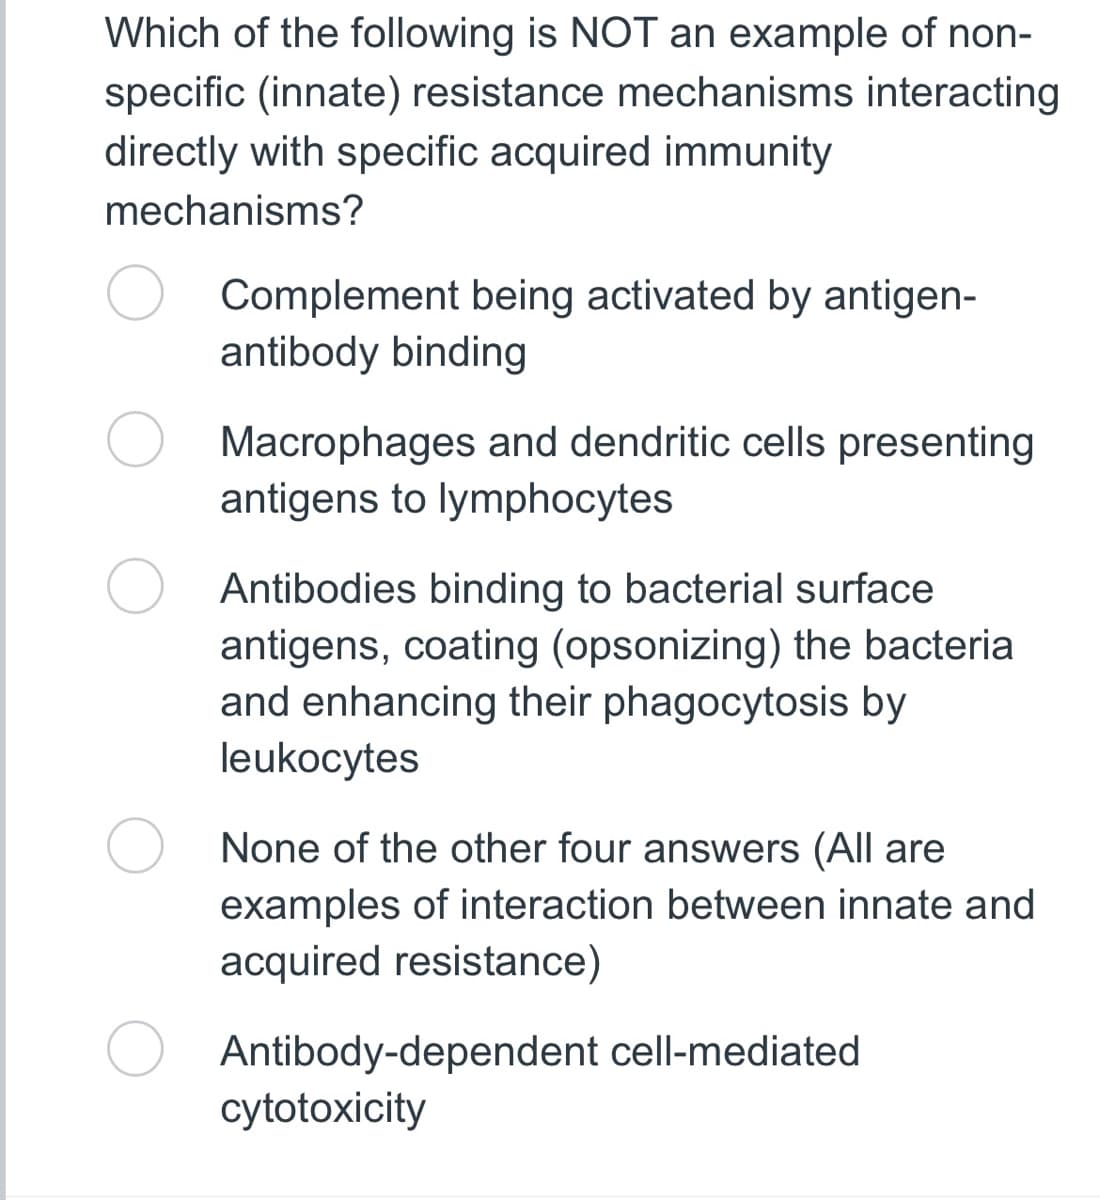 Which of the following is NOT an example of non-
specific (innate) resistance mechanisms interacting
directly with specific acquired immunity
mechanisms?
Complement being activated by antigen-
antibody binding
Macrophages and dendritic cells presenting
antigens to lymphocytes
Antibodies binding to bacterial surface
antigens, coating (opsonizing) the bacteria
and enhancing their phagocytosis by
leukocytes
None of the other four answers (All are
examples of interaction between innate and
acquired resistance)
Antibody-dependent cell-mediated
cytotoxicity